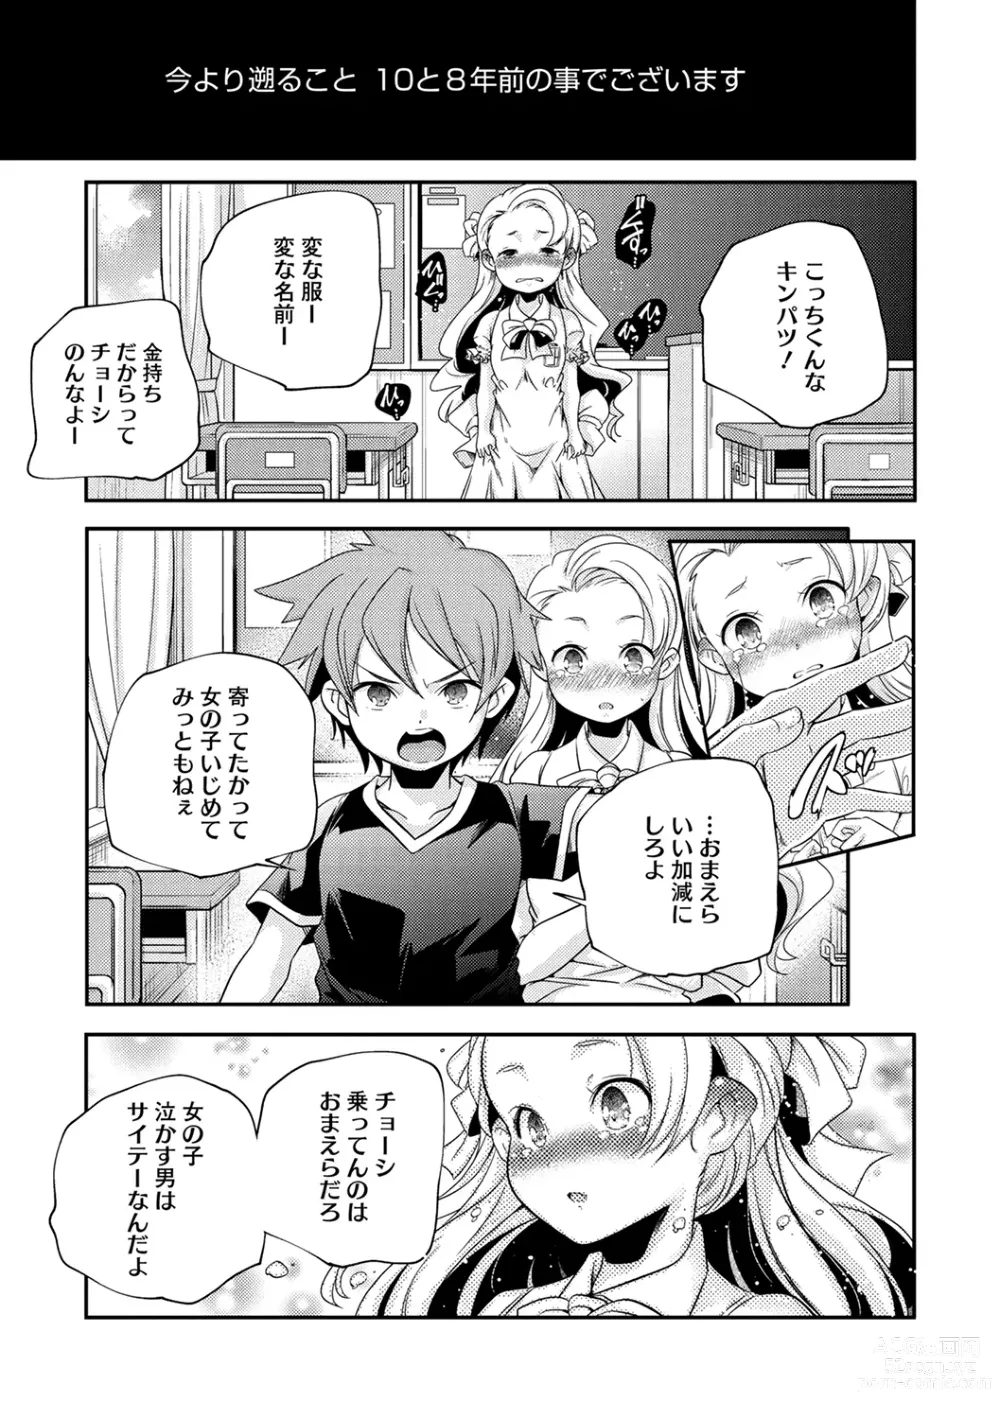 Page 21 of manga LQ -Little Queen- Vol. 52